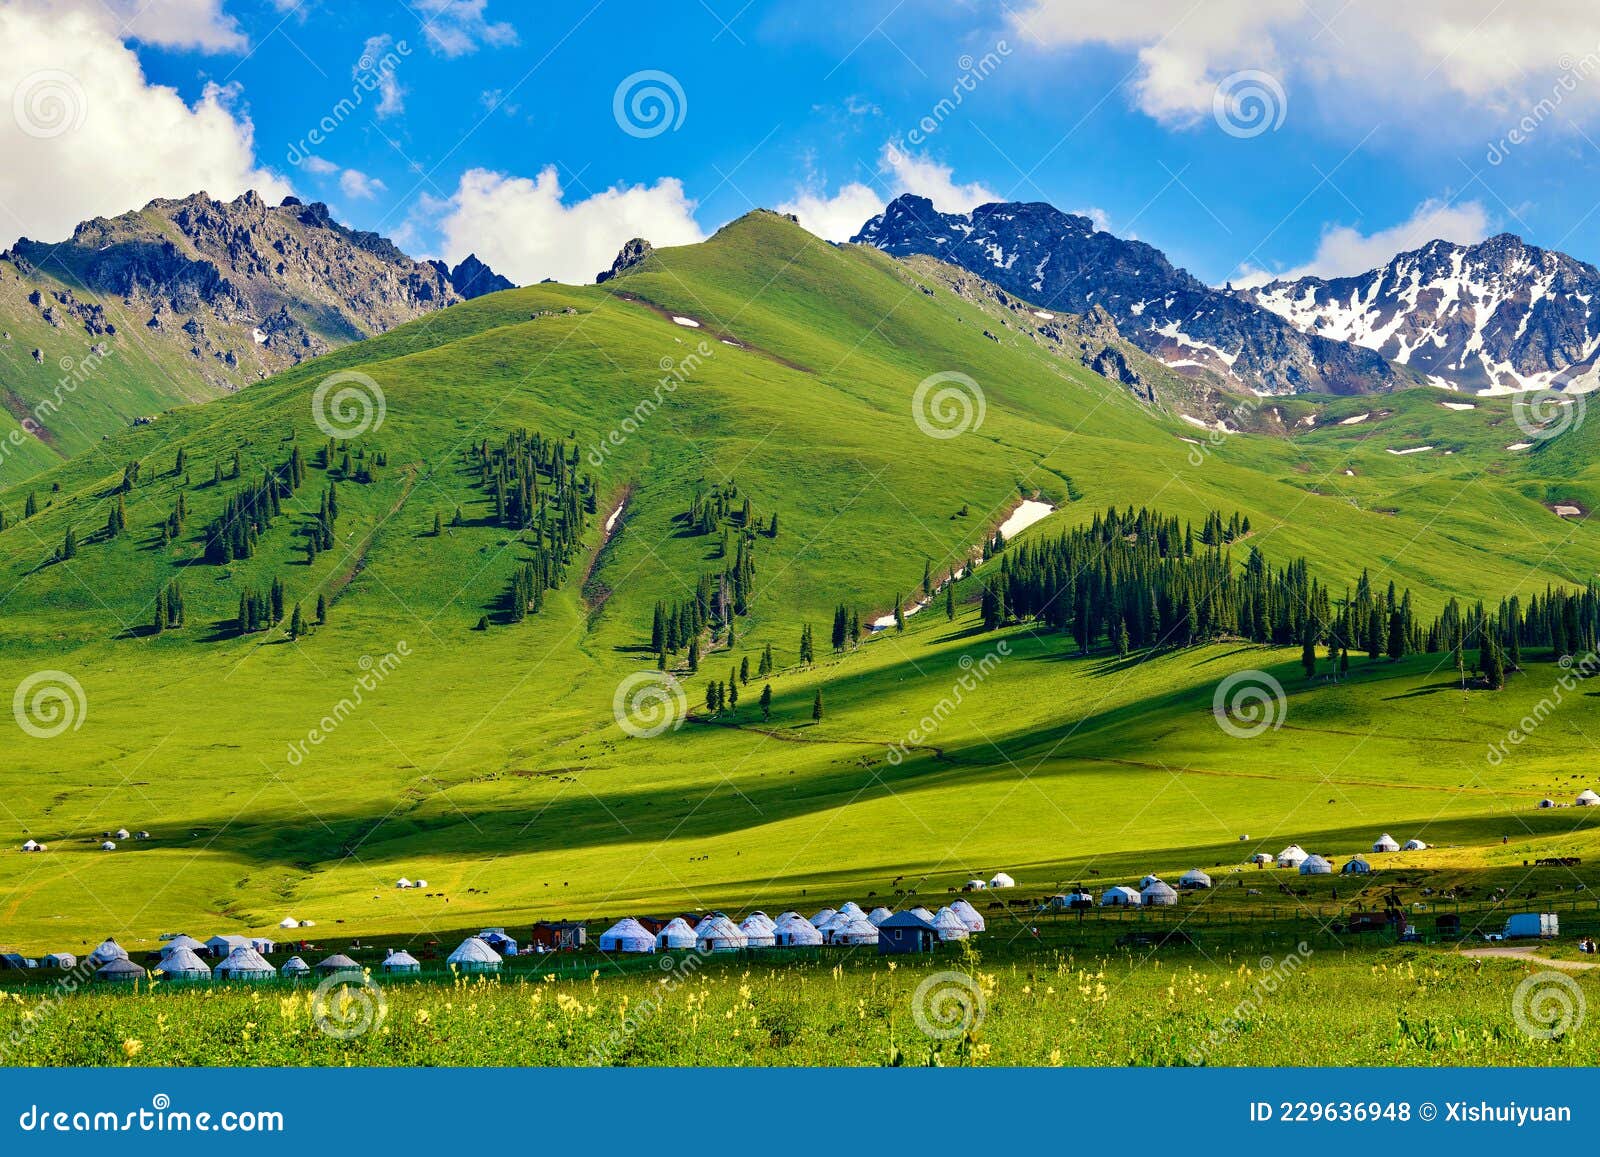 the mountains and mongolia yurts in summer grassland